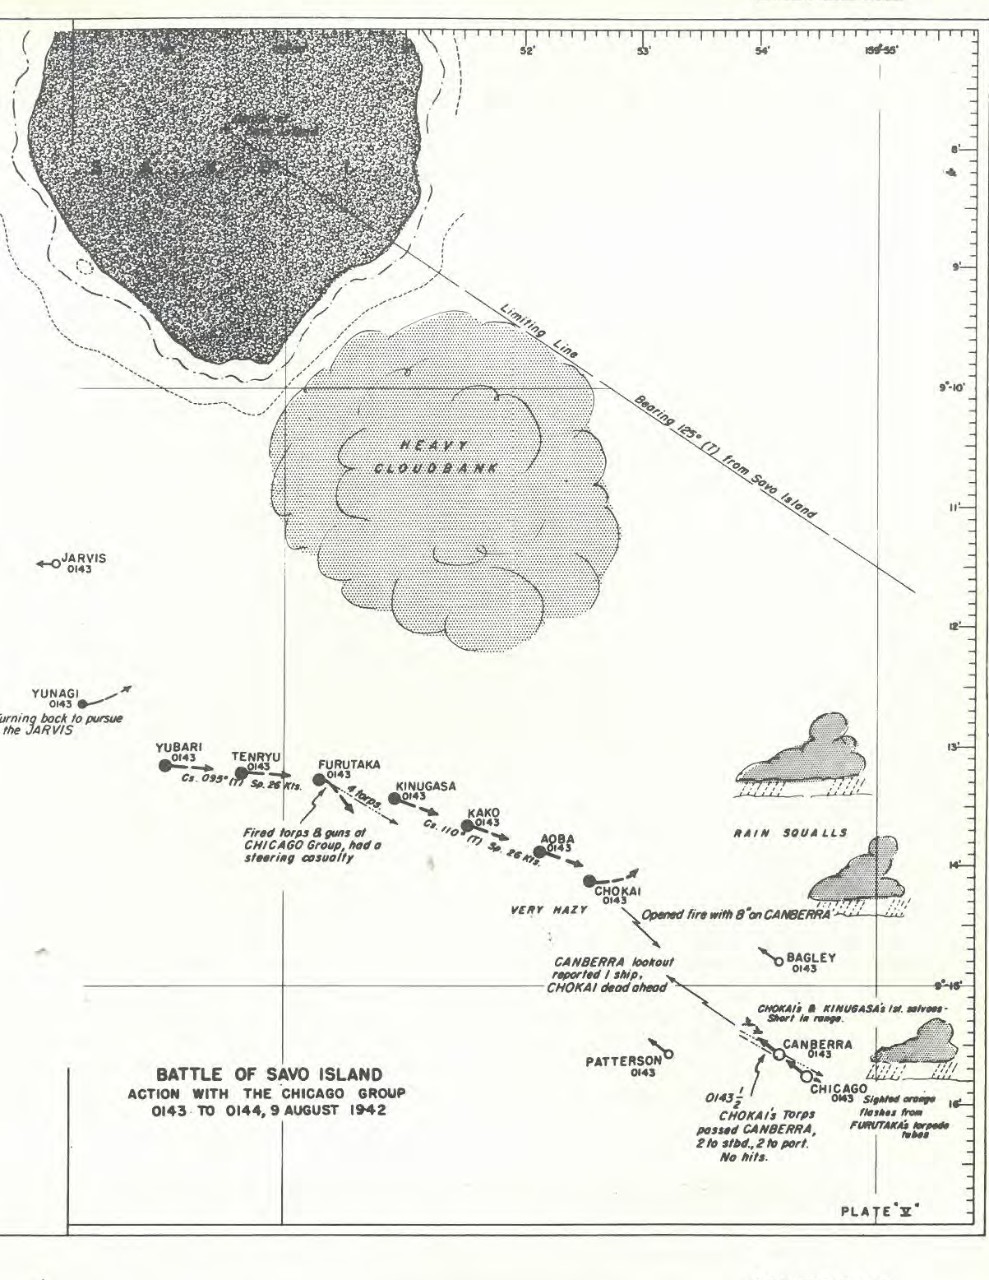 A chart shows the movements of the opposing ships as the Japanese attack the Southern Group during the Battle of Savo Island, 0143–0144 on 9 August 1942. Not all of the ships are plotted correctly but the chart provides a glimpse of the chaos as the enemy assails the Allied ships. (The Battle of Savo Island, August 9, 1942, Strategical and Tactical Analysis, Newport, R.I.: U.S. Naval War College, Plate V, pp. 116–17)